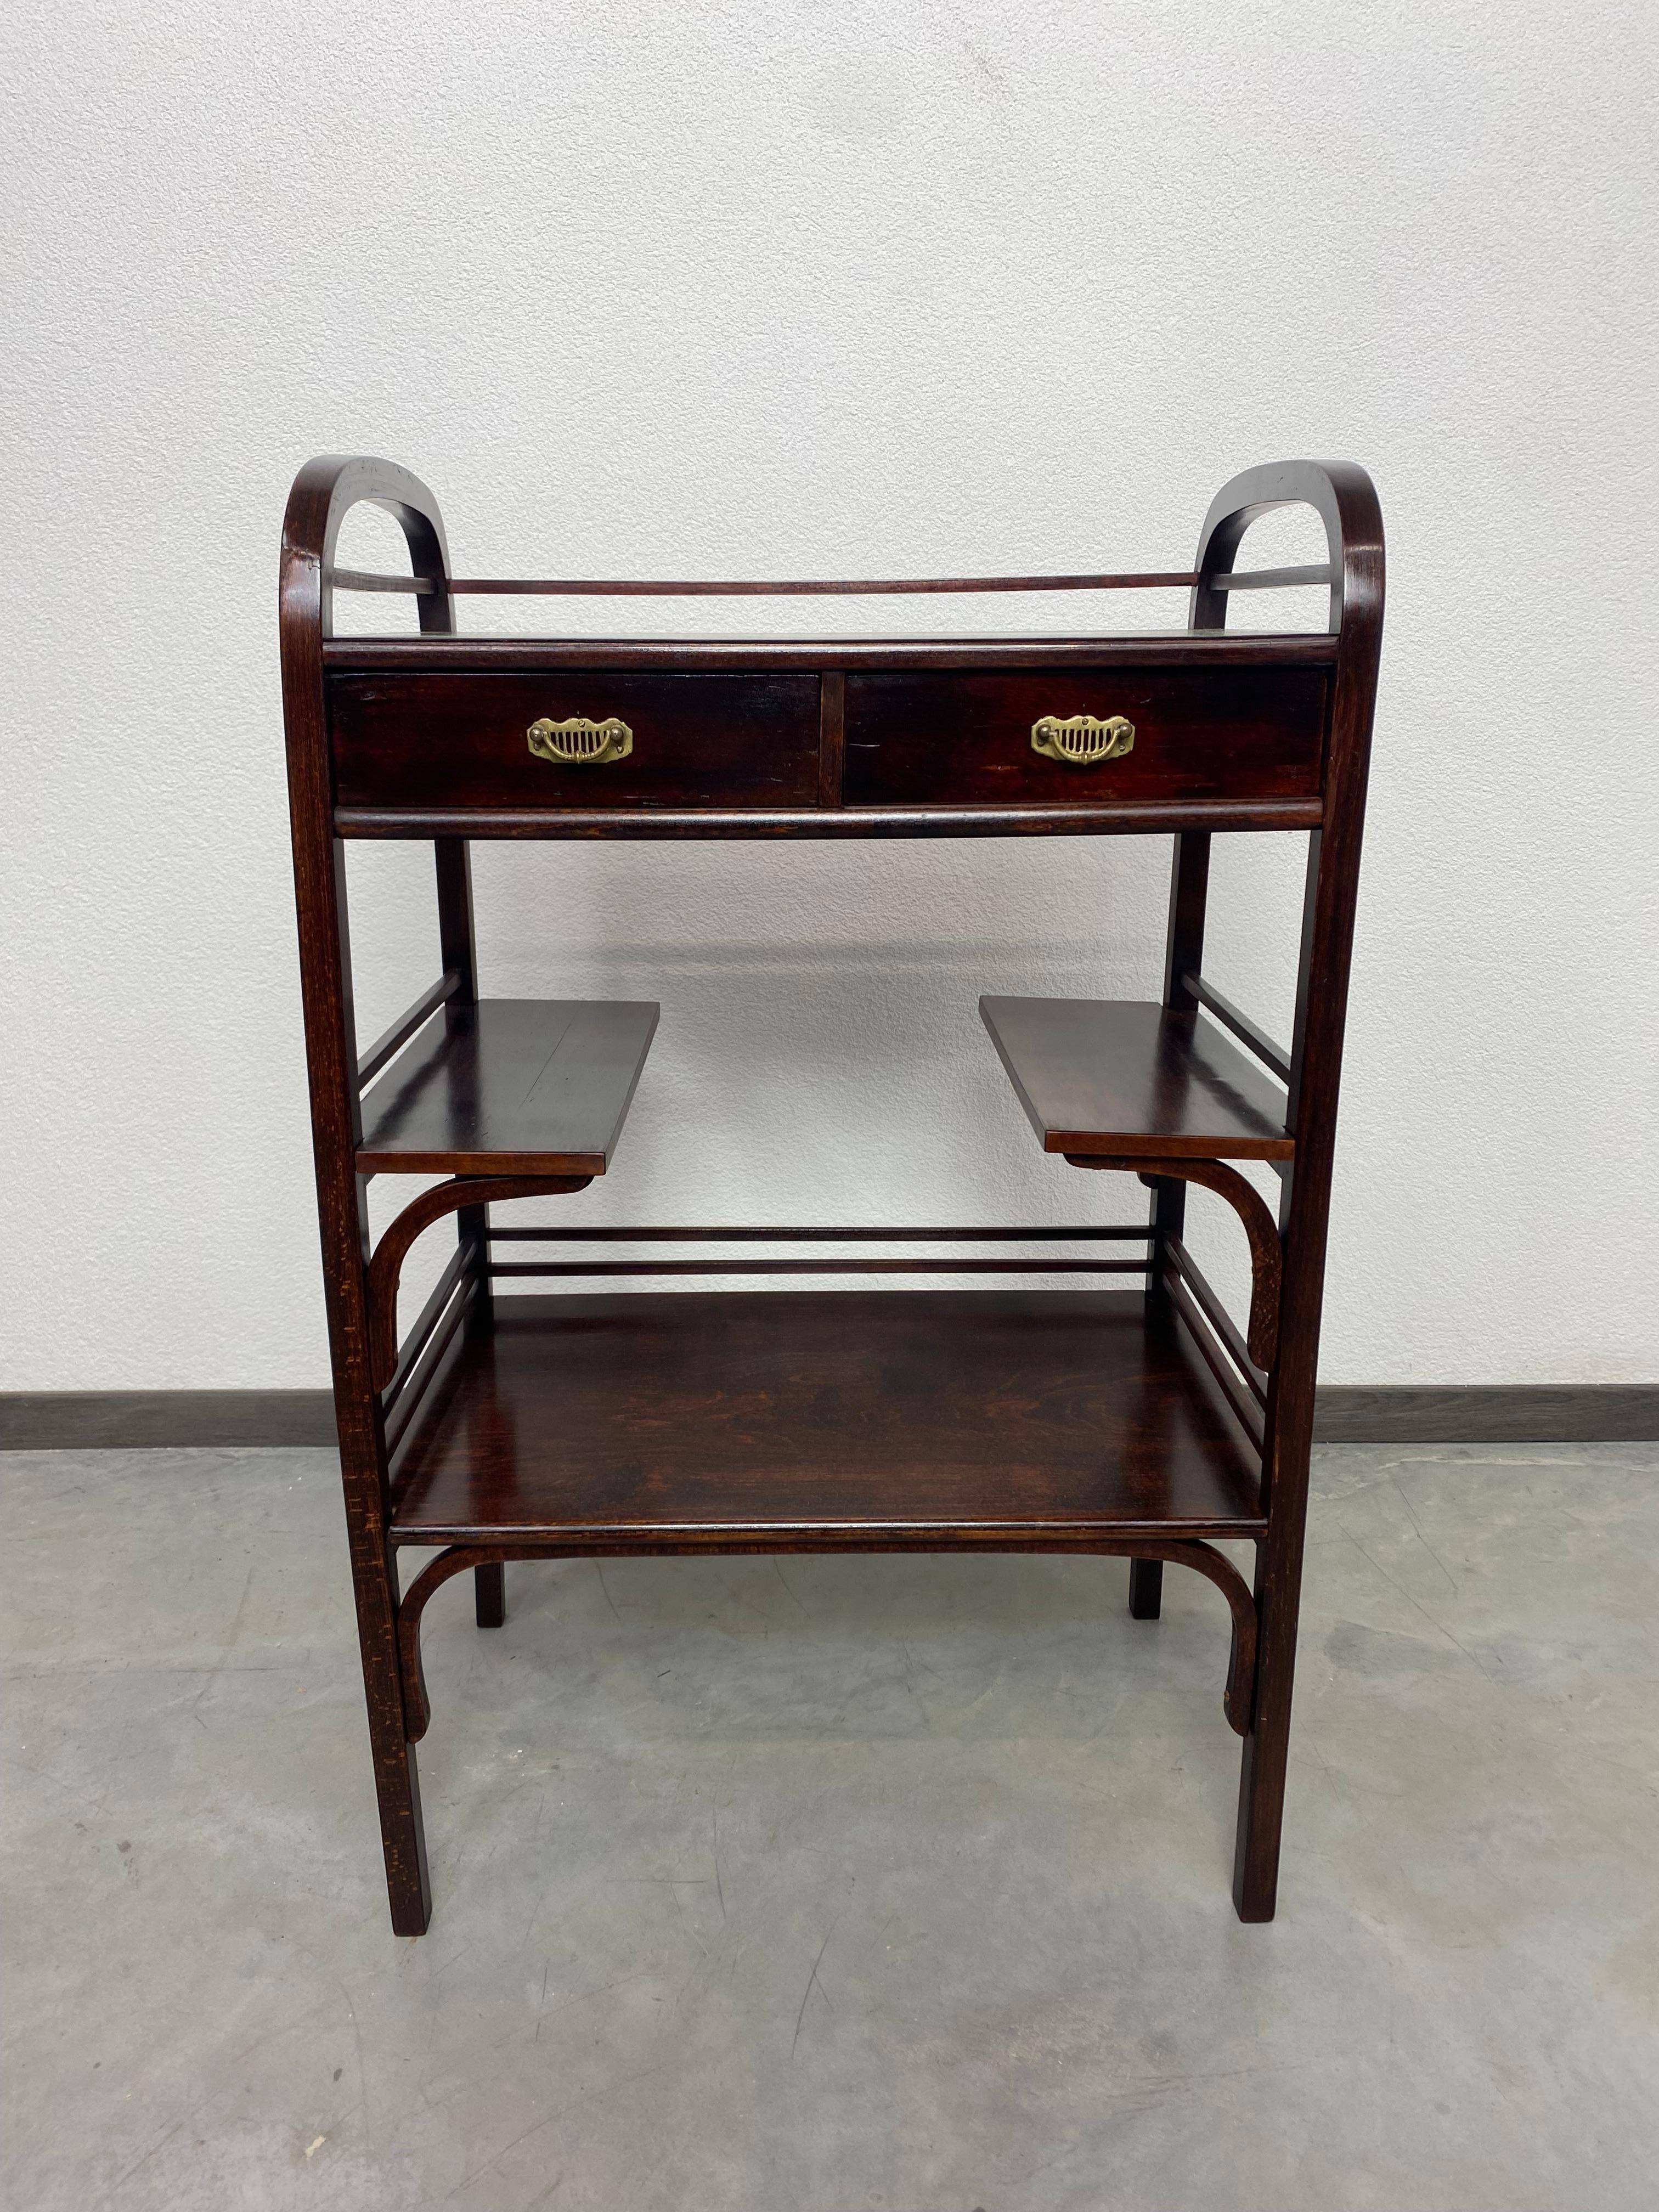 Vienna secession bentwood etagere atr. to Koloman Moser and Otto Wagner ex. by J&J Kohn in very good original condition.